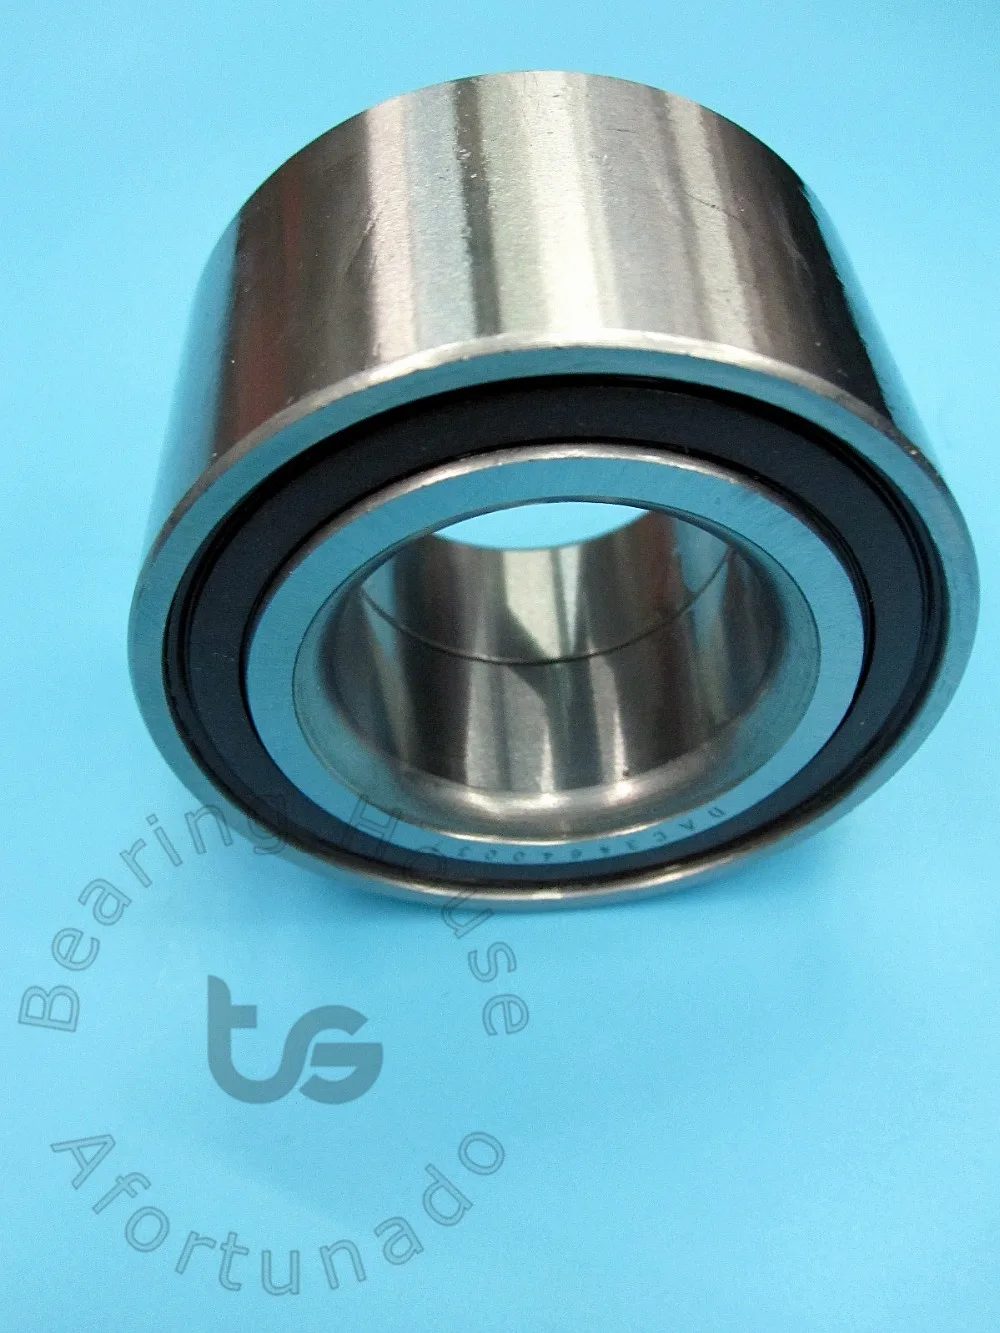 DAC34640037/DAC3464G12RSCS42/34BWD04BCA70/540466B/BA2B309726DA  For cars Hub bearing chrome steel materail size:34*64*37mm images - 6